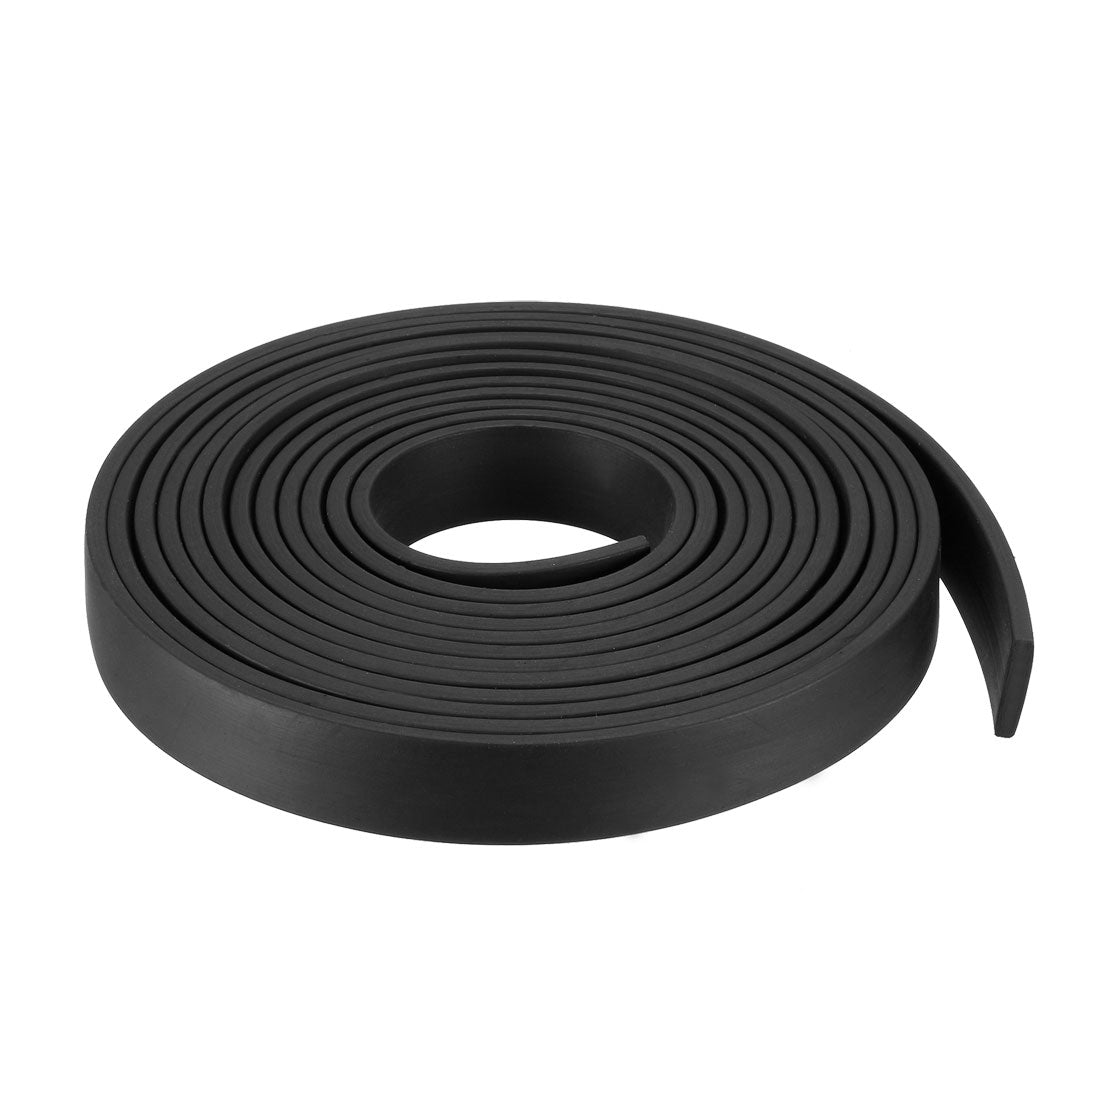 uxcell Uxcell Solid Rectangle Rubber Seal Strip 15mm Wide 3mm Thick, 3 Meters Long Black